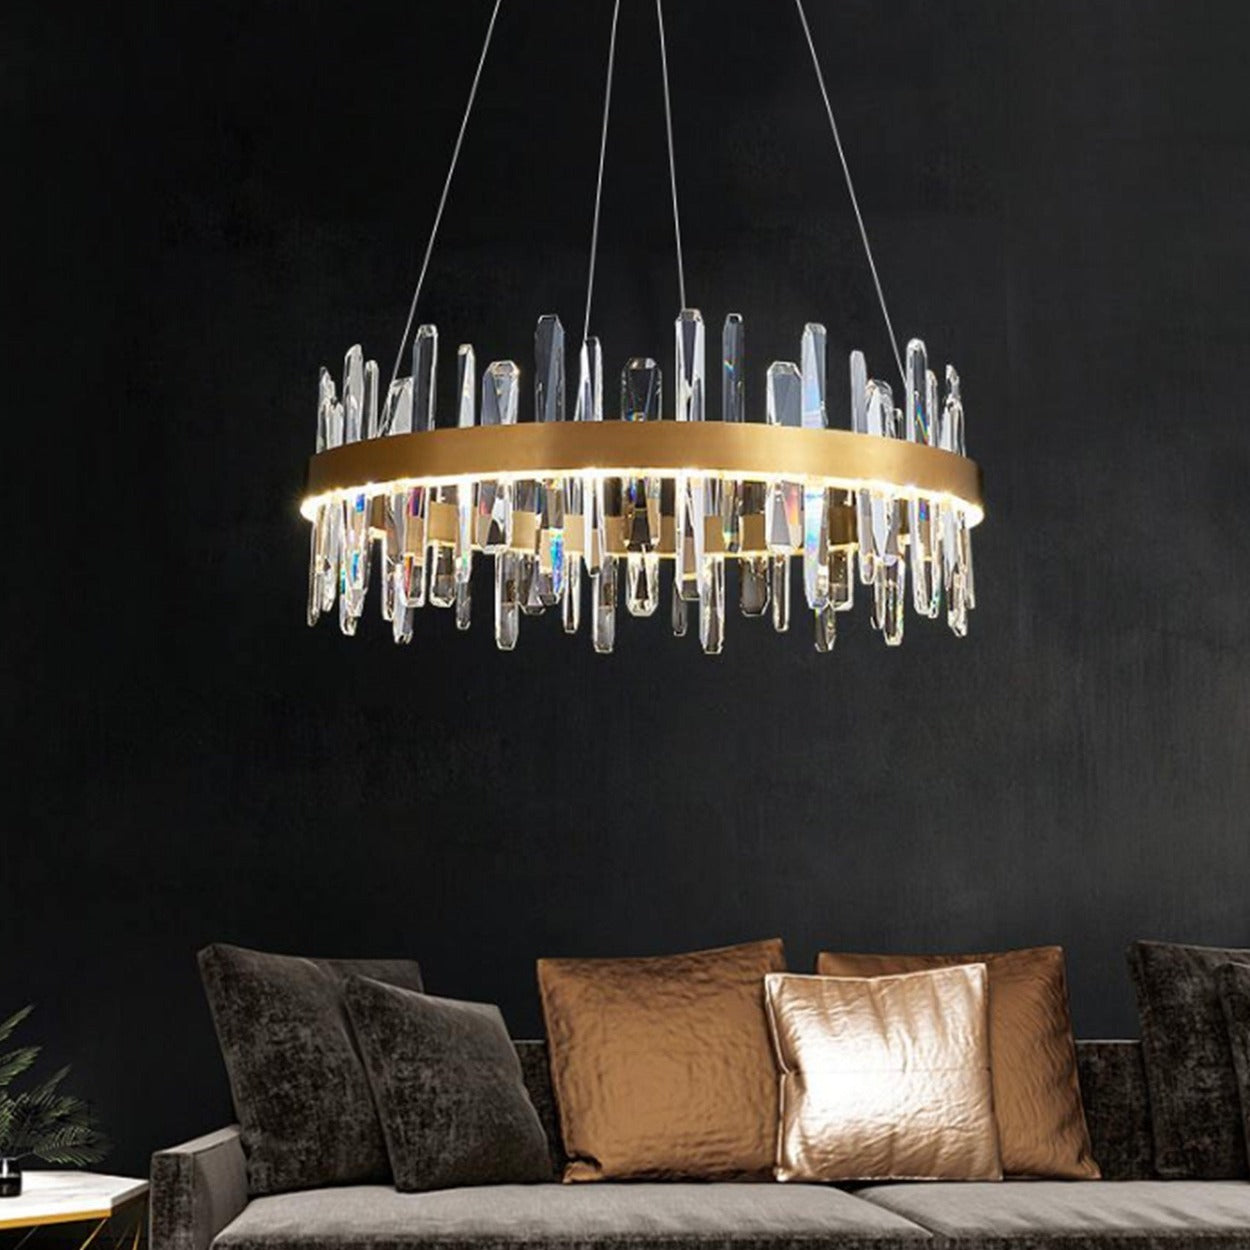 ANKUR SPACED CRYSTAL BAR LED ROUND CONTEMPORARY CHANDELIER - Ankur Lighting